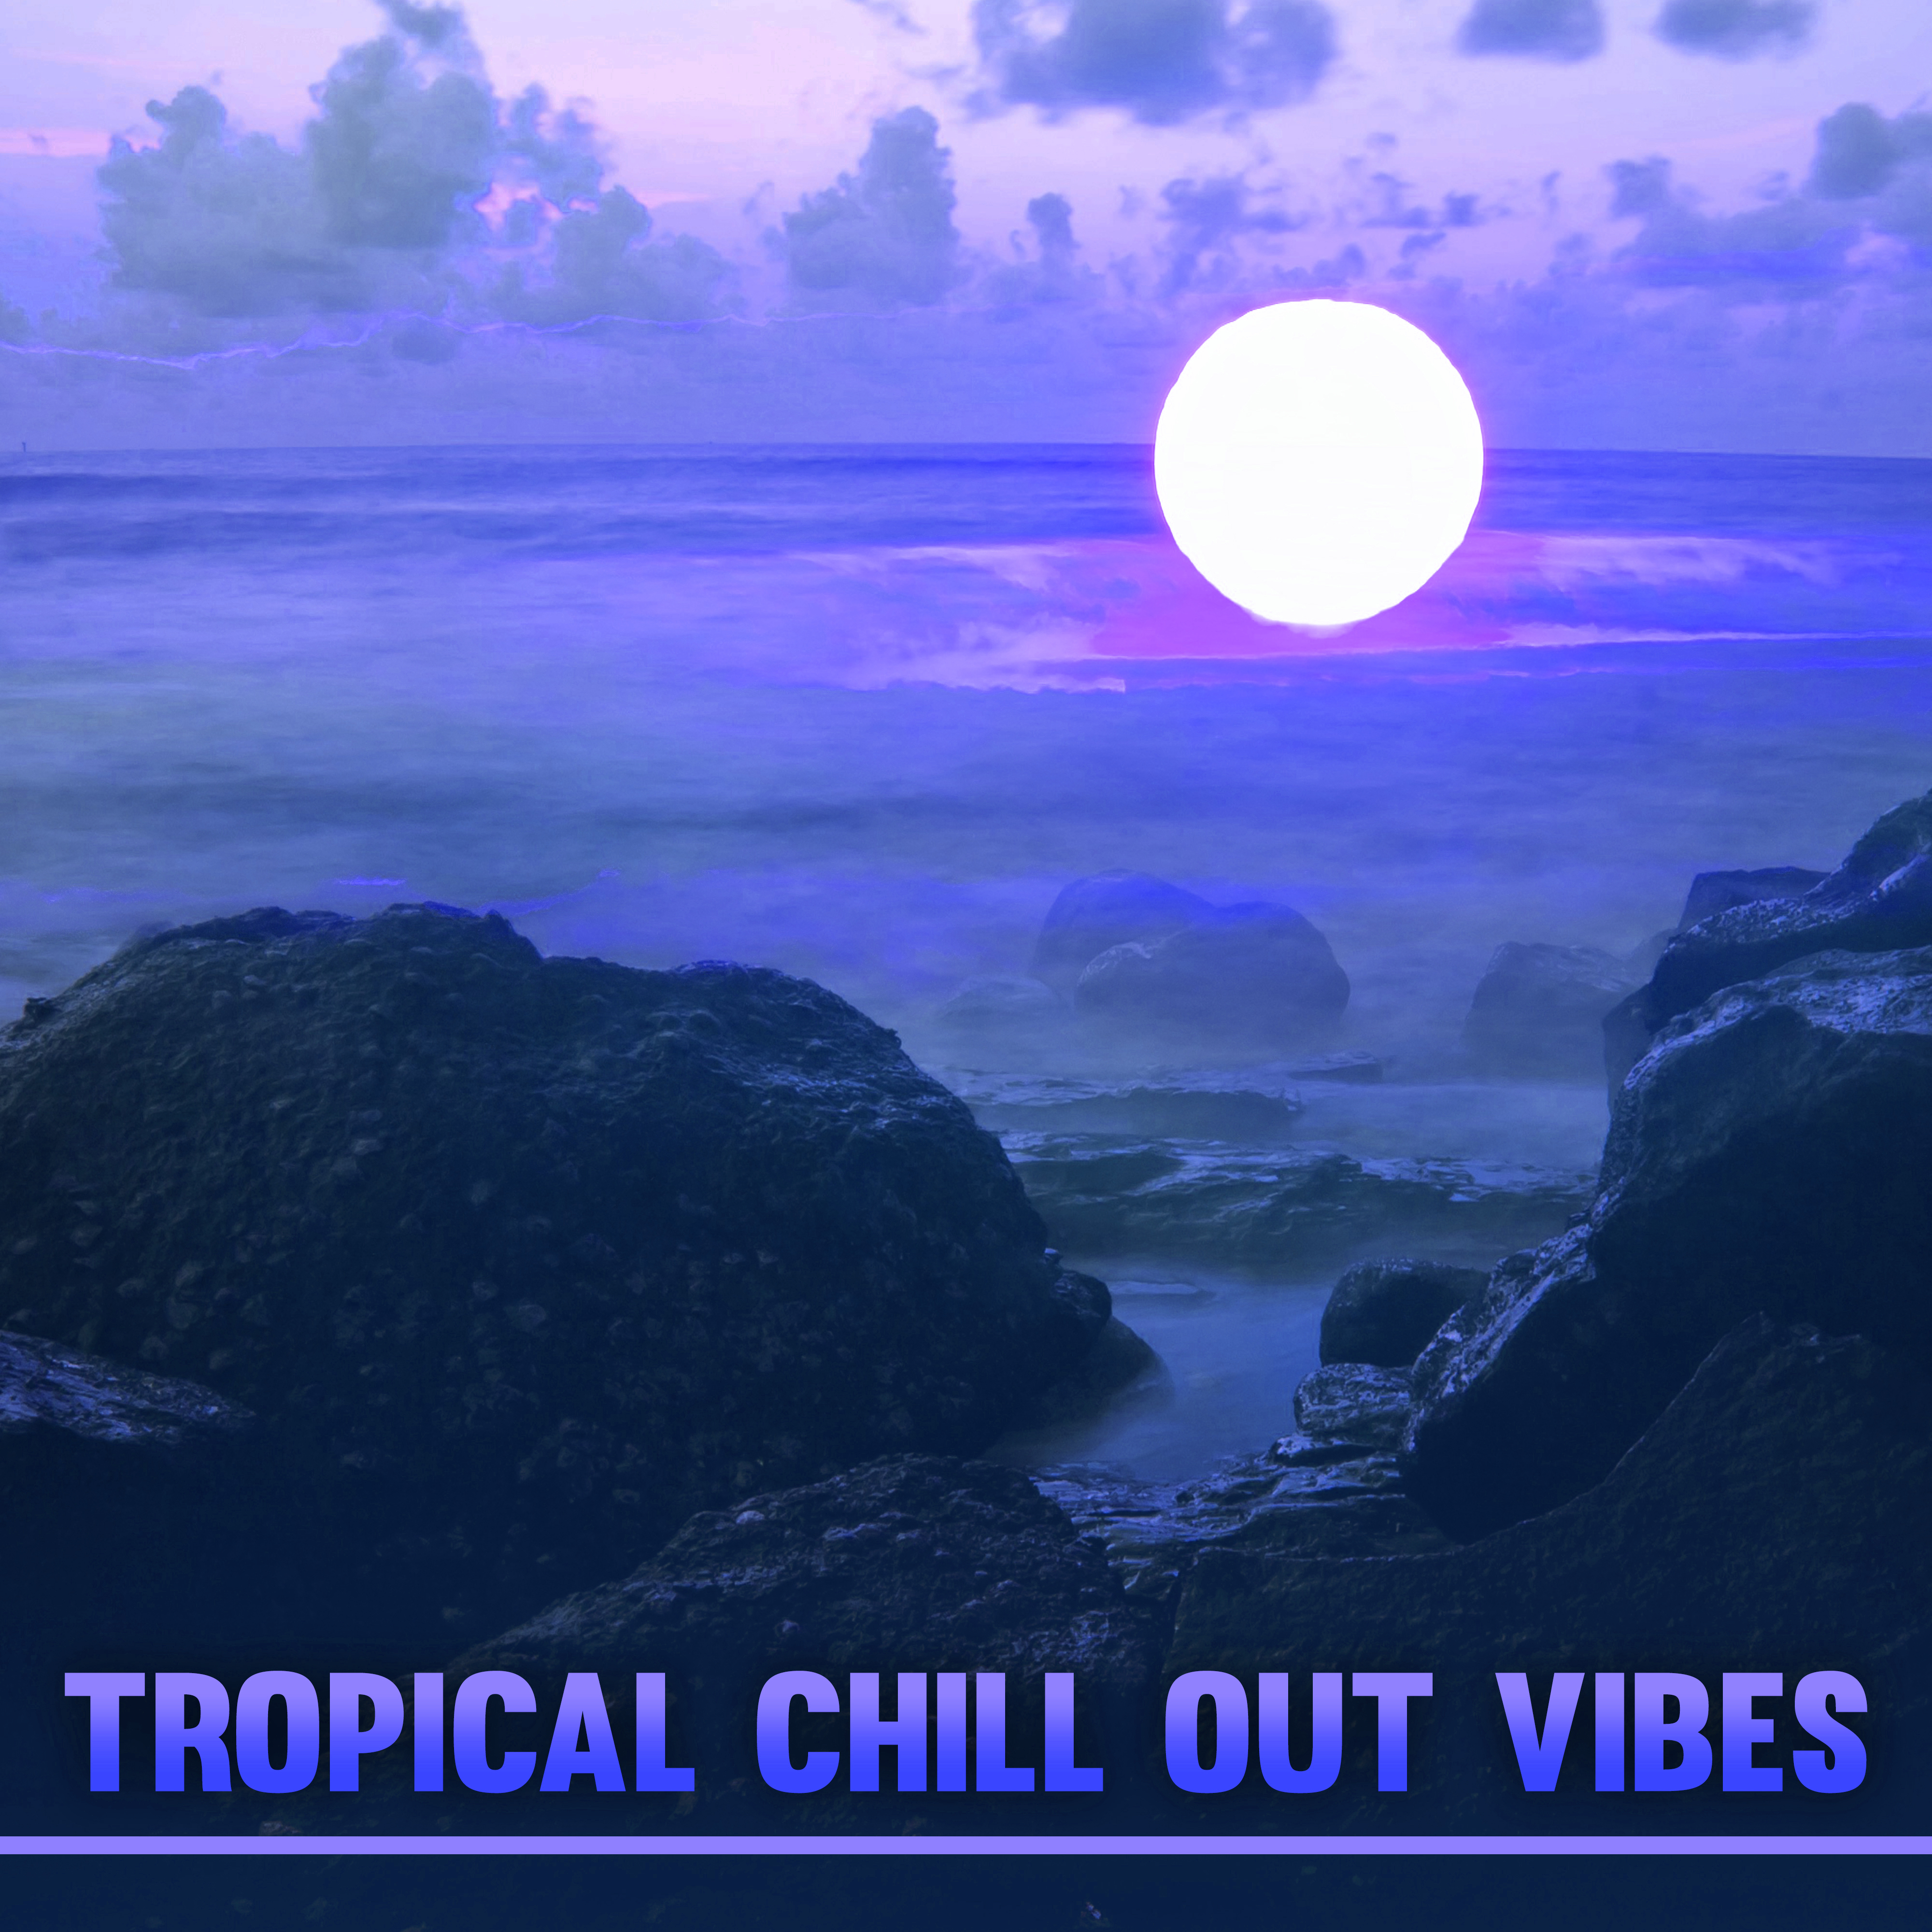 Tropical Chill Out Vibes – Sunny Holiday Music, Sounds to Relax, Chilled Waves